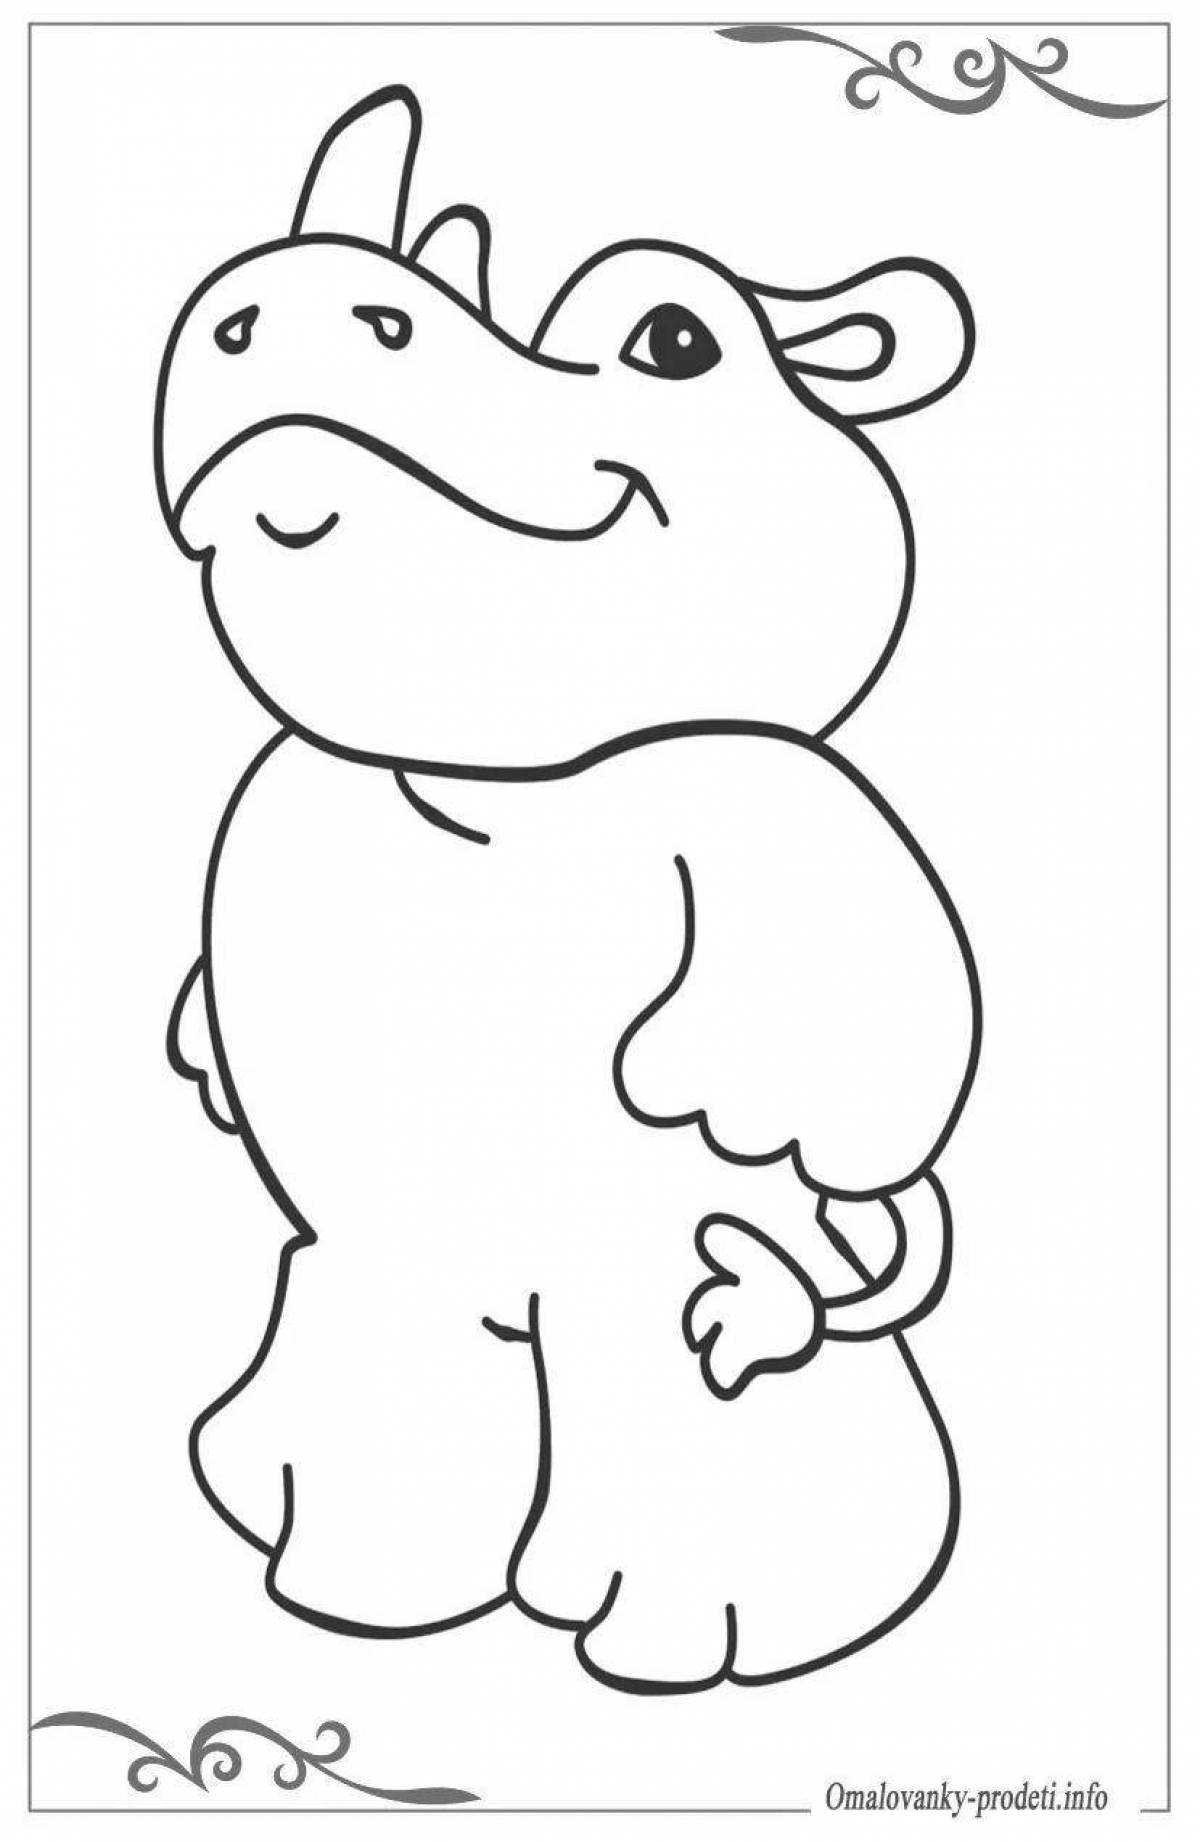 Exotic animal coloring pages for kids